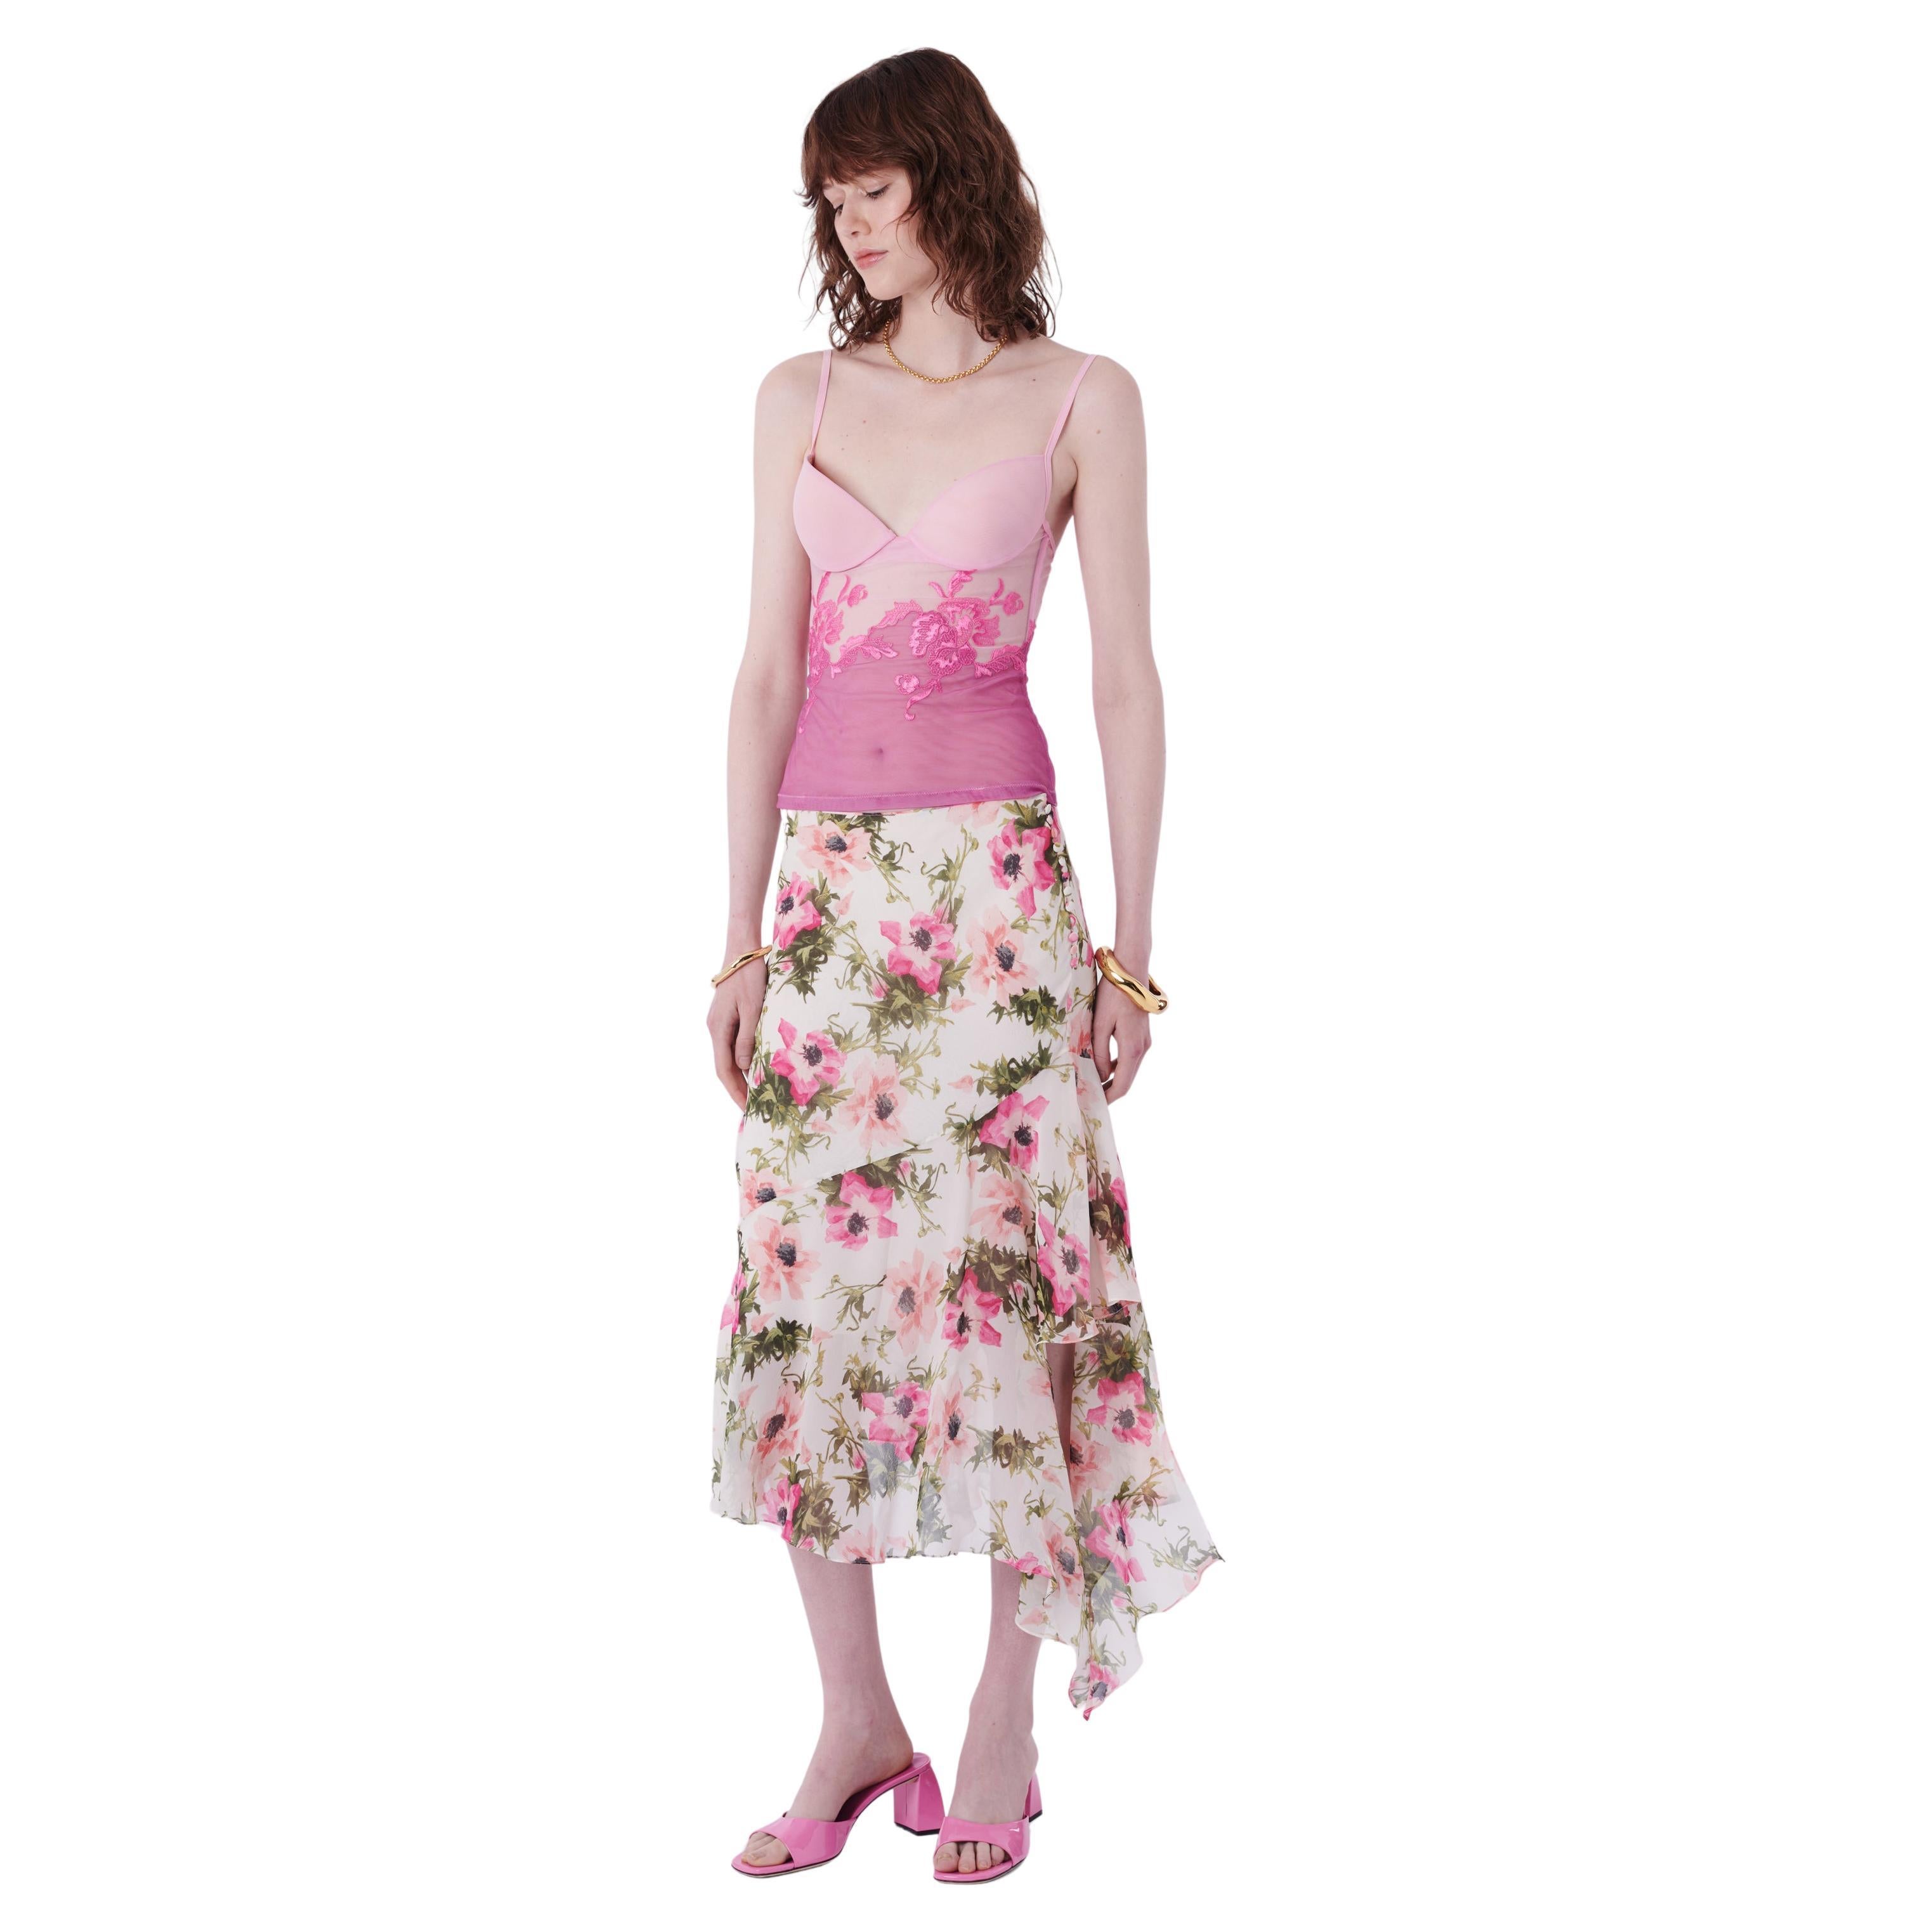 S/S 2005 Floral Silk Skirt For Sale